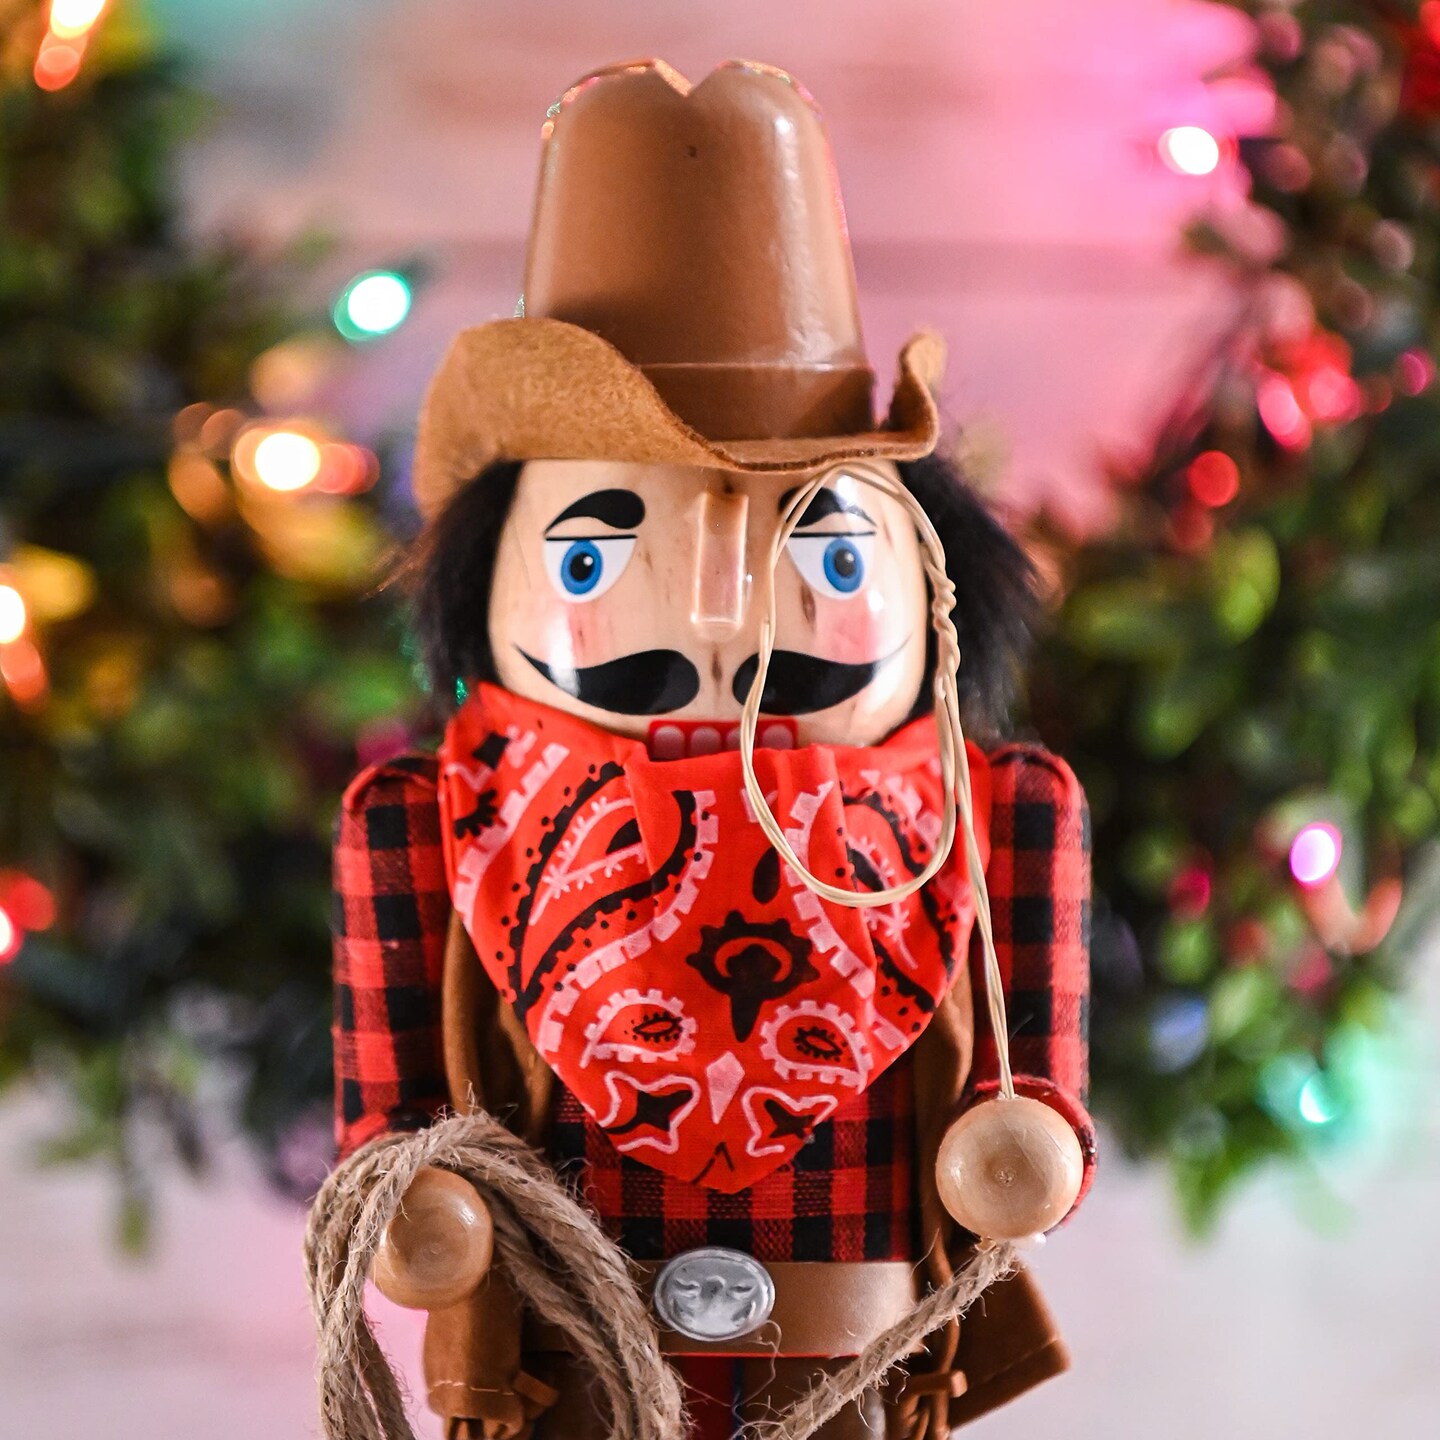 Ornativity Christmas Western Cowboy Nutcracker &#x2013; Brown and Red Wooden Nutcracker Cow Boy with a Rope and Lasso Xmas Themed Holiday Nut Cracker Doll Figure Decorations